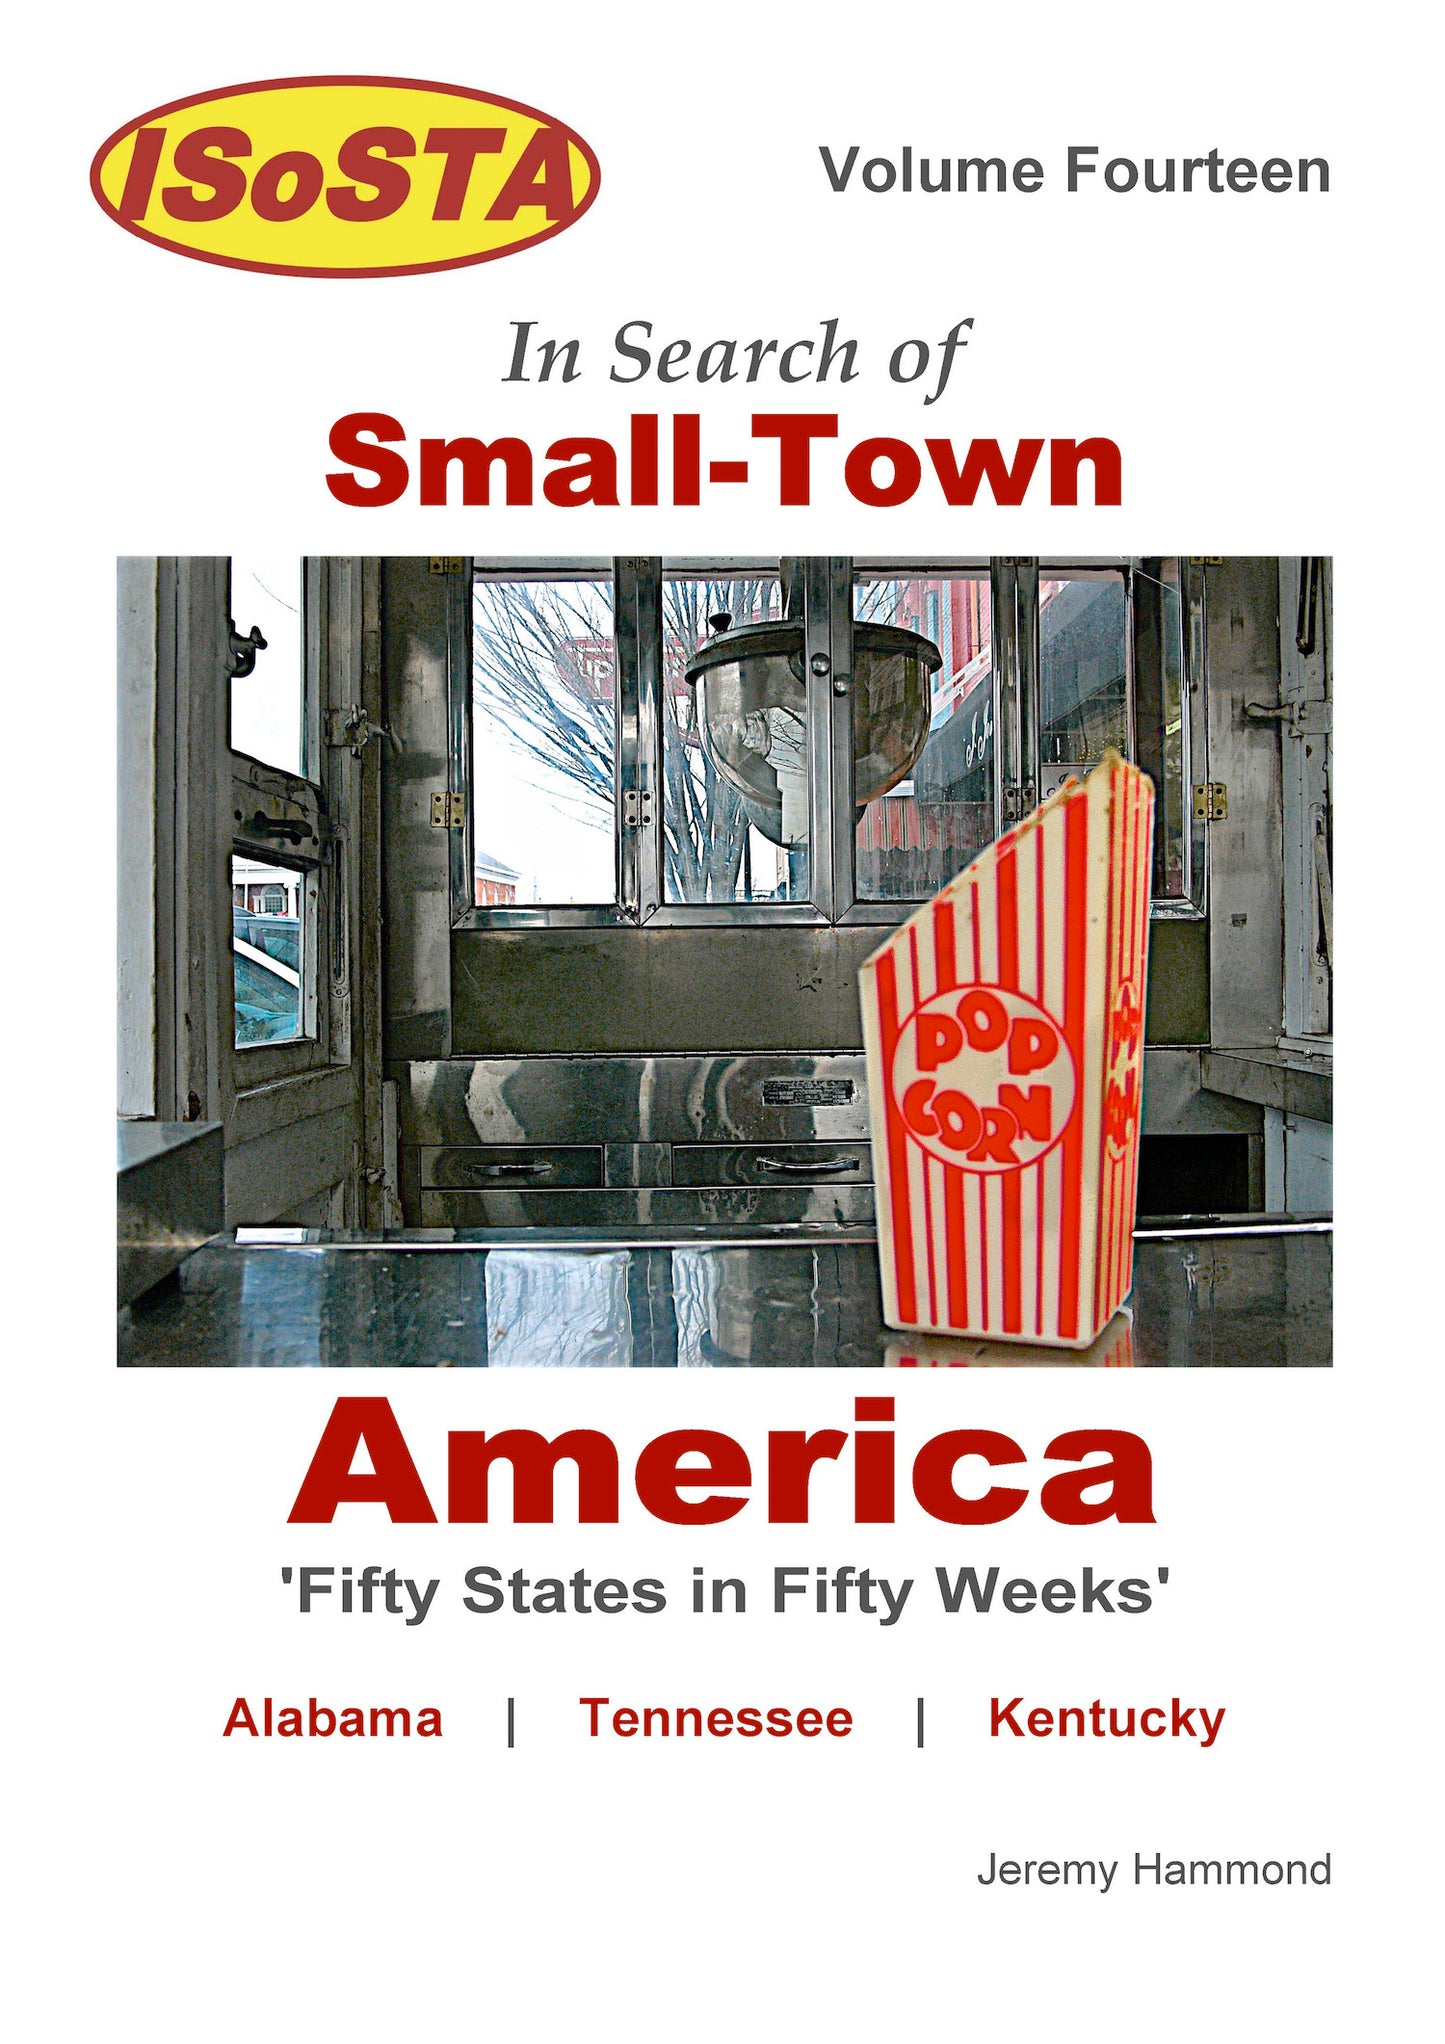 In Search of Small-Town America: Volume 14